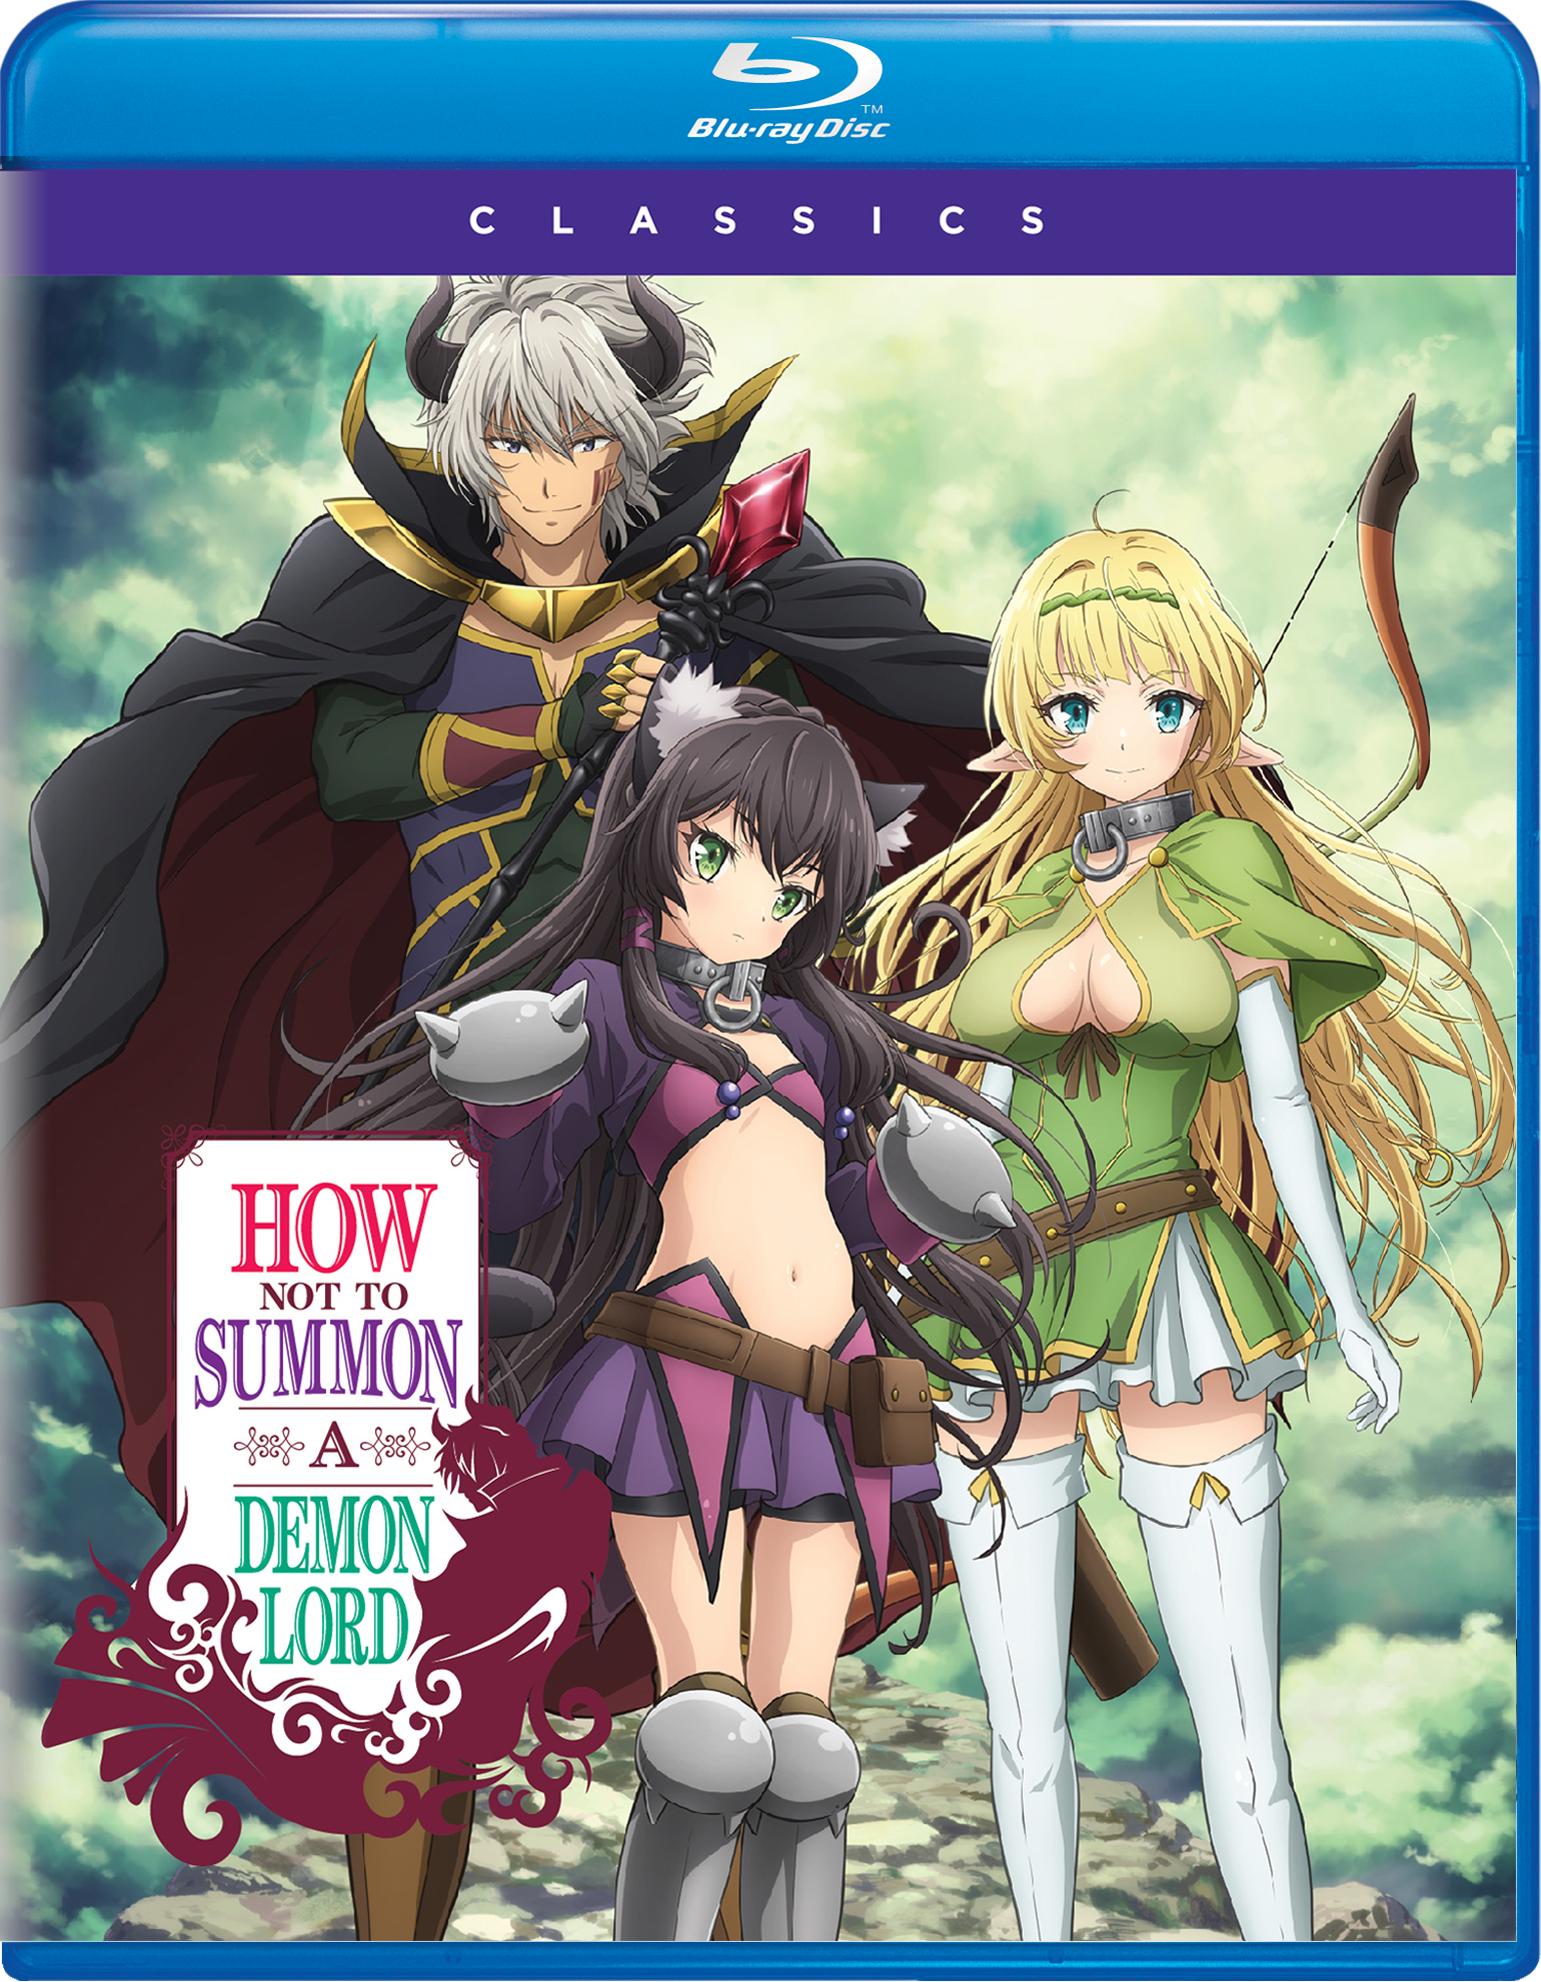 How Not To Summon A Demon Lord: The Complete Season (Classics Blu-ray + Digital) - Blu-ray